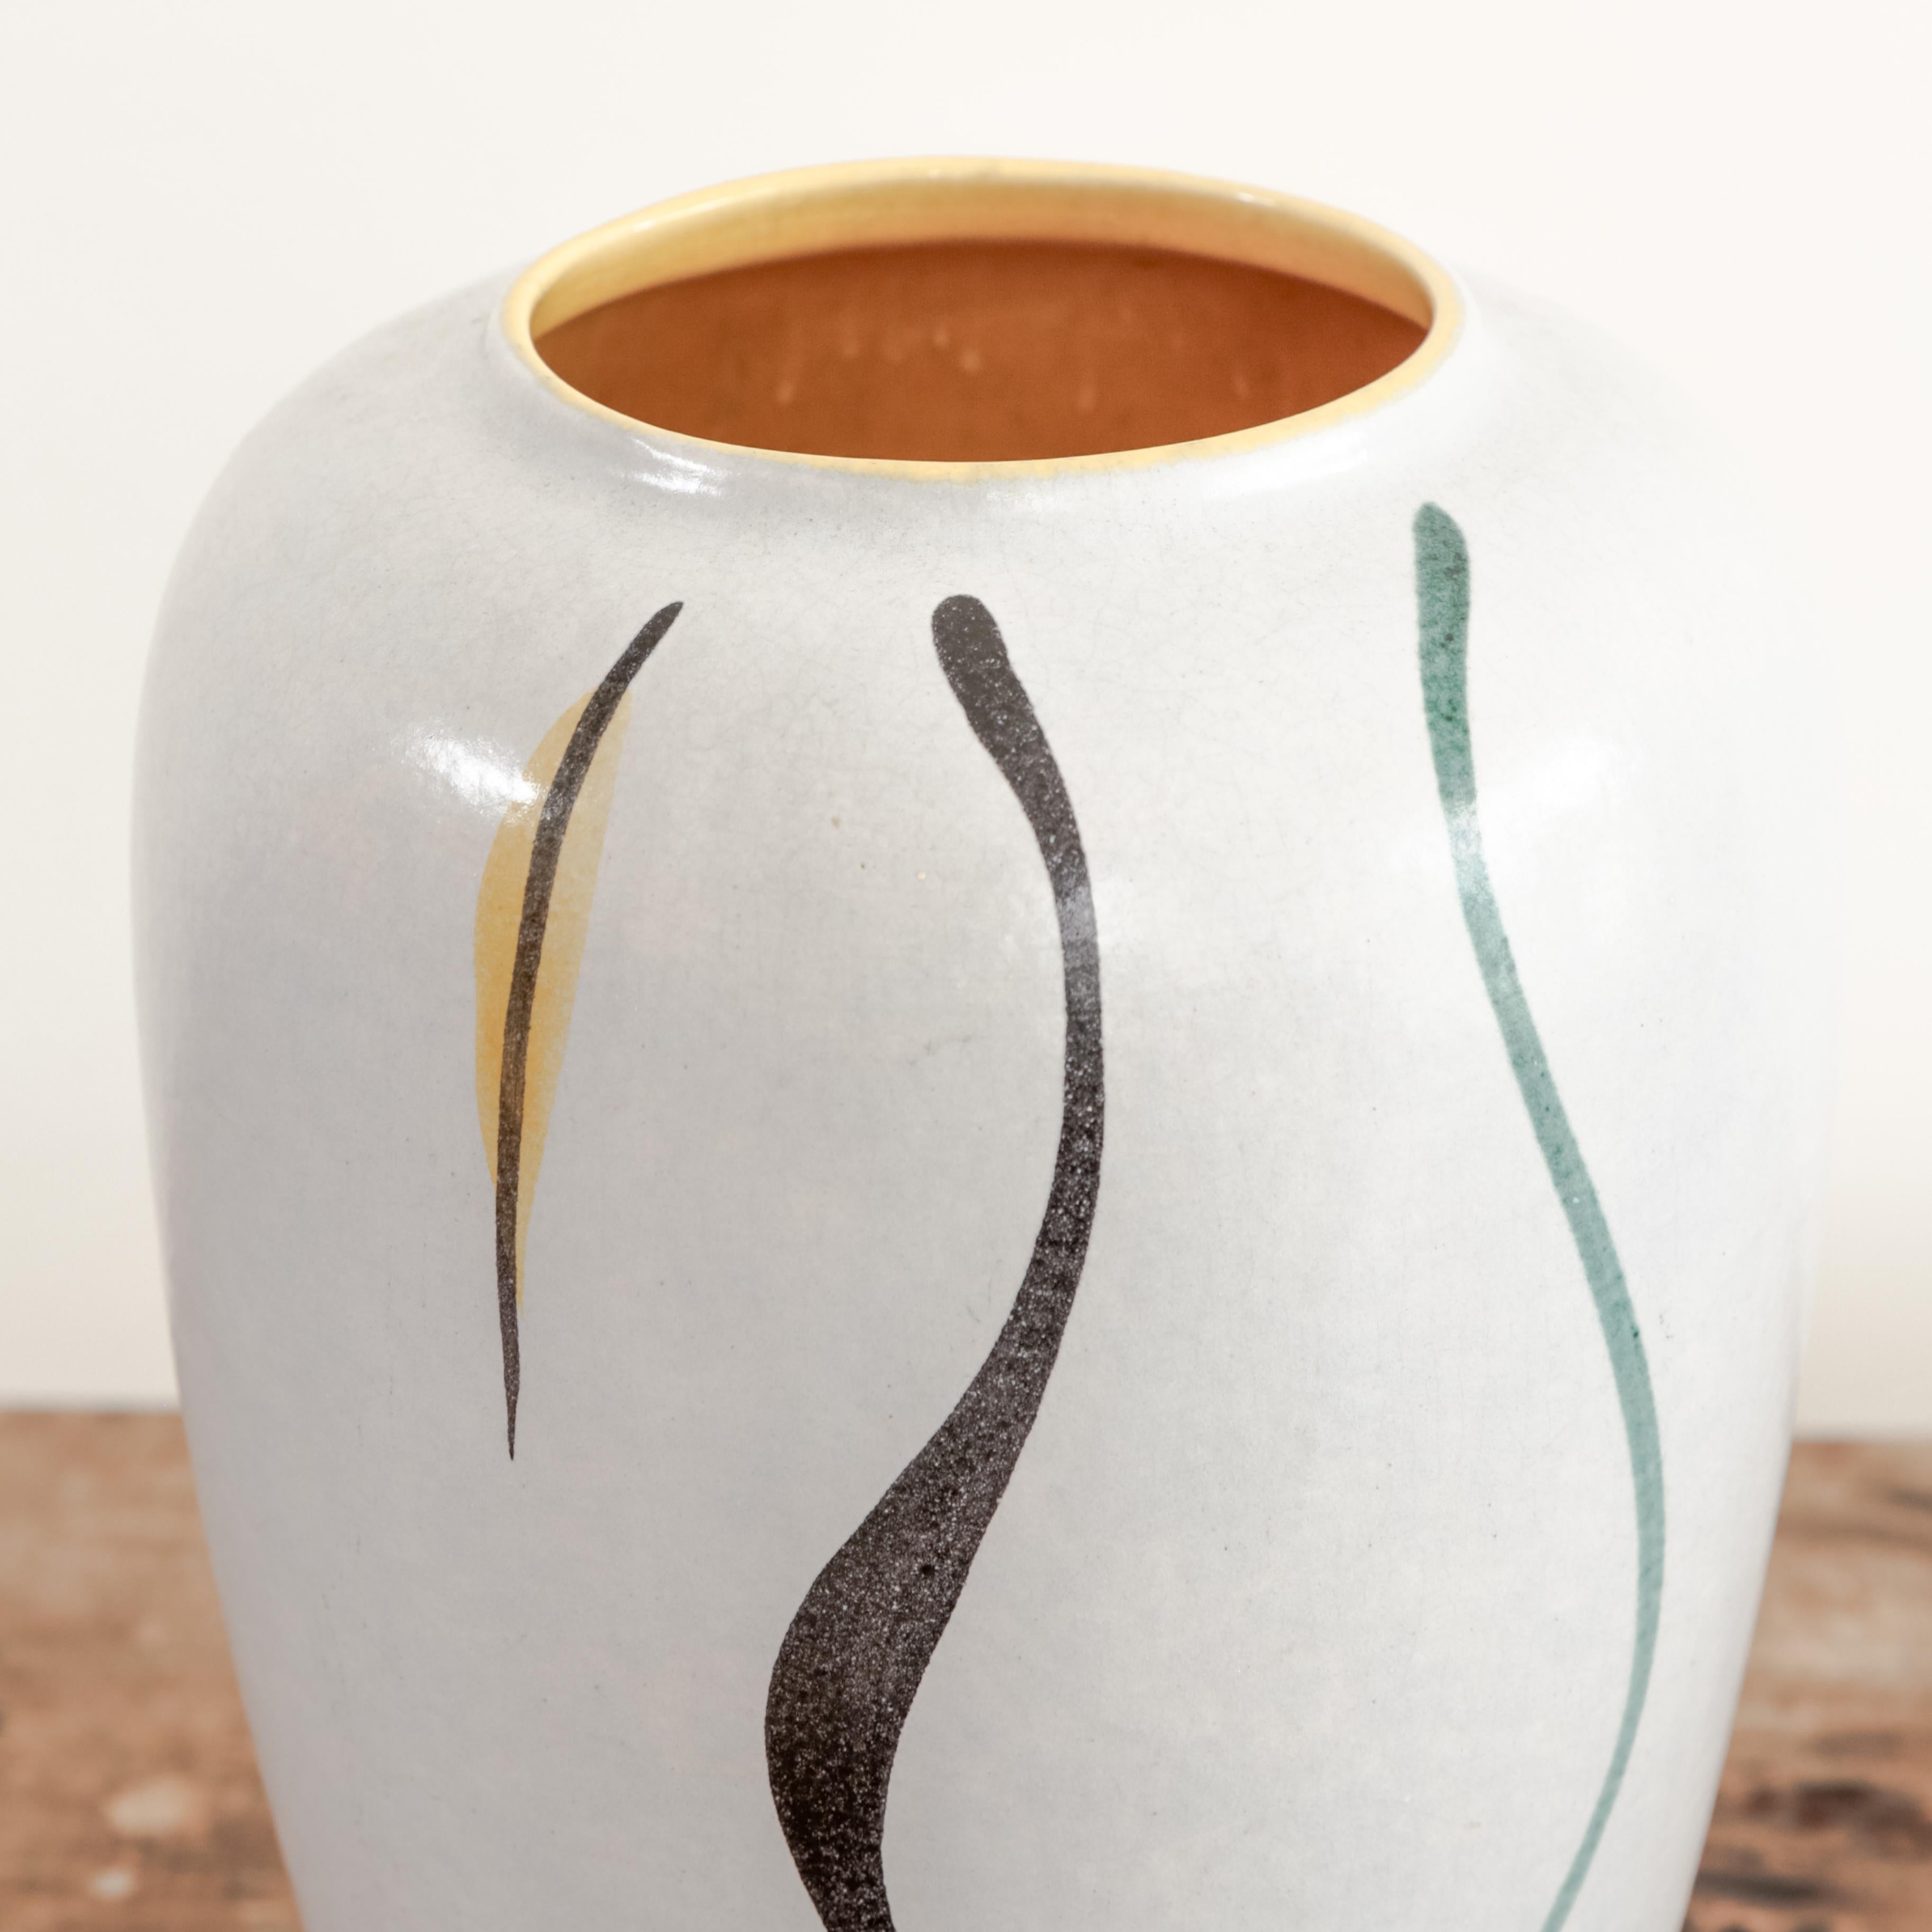 Soft blue ceramic vase 239 30 by Foreign, with brush stroke motifs and yellow glazed interior, West Germany circa 1970's.